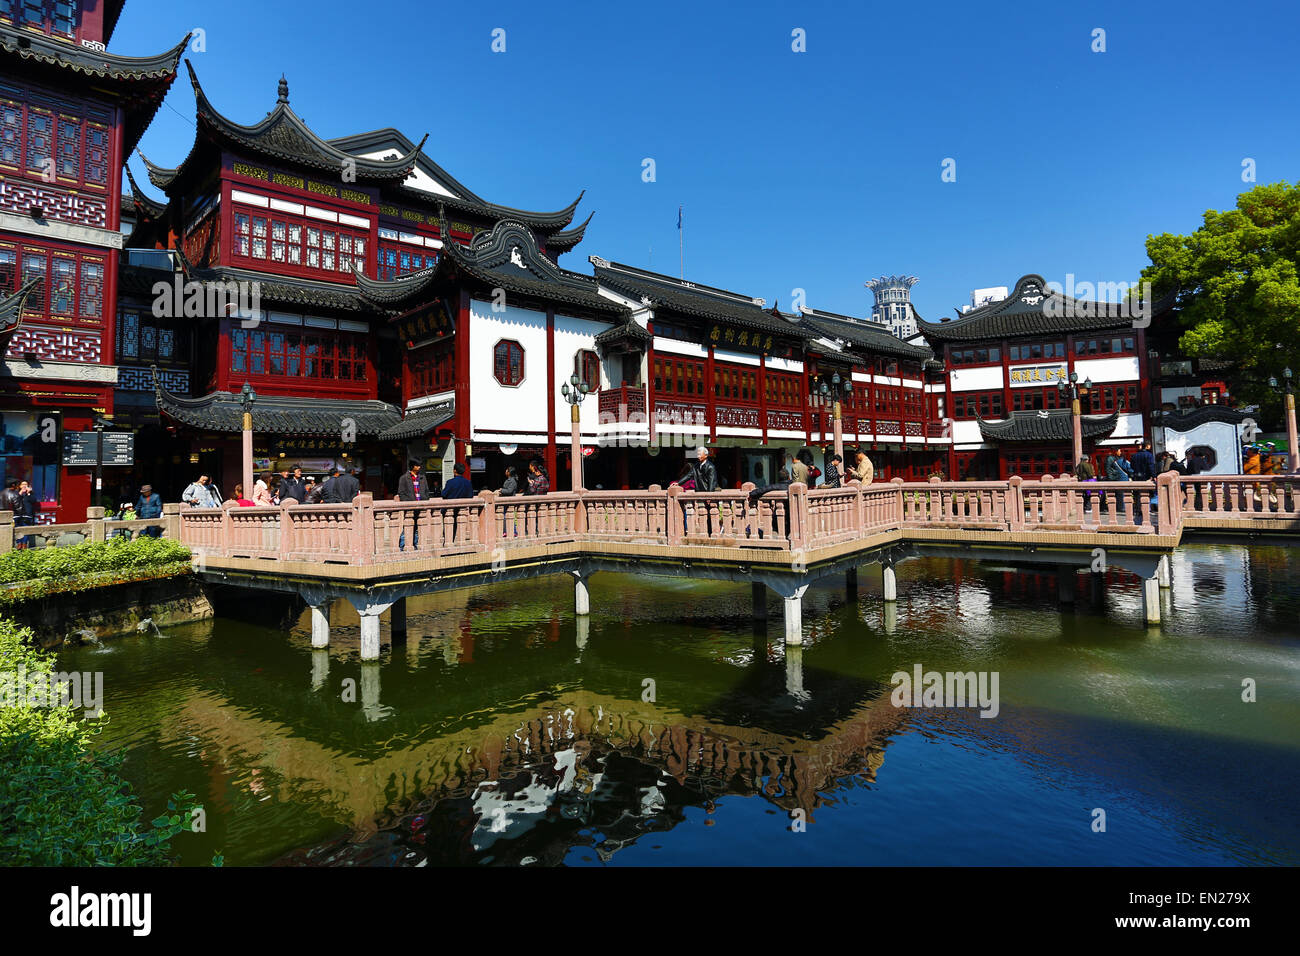 Zigzag Bridge at the Yuyuan Garden in the Old City, Shanghai, China Stock Photo